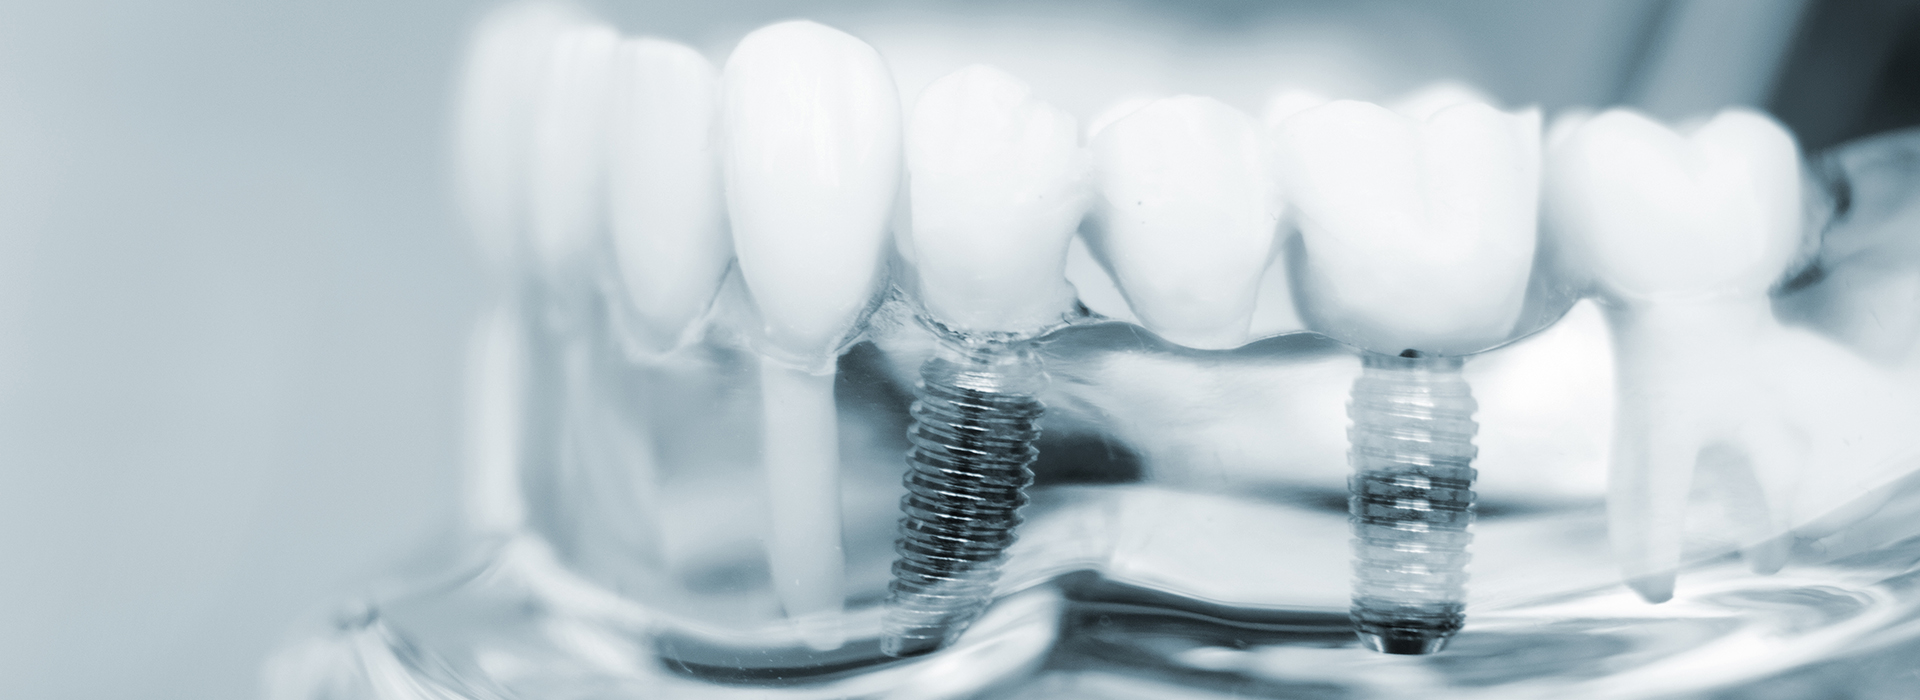 Corey J. Walther, DDS   Associates | Root Canals, Implant Dentistry and Dental Bridges